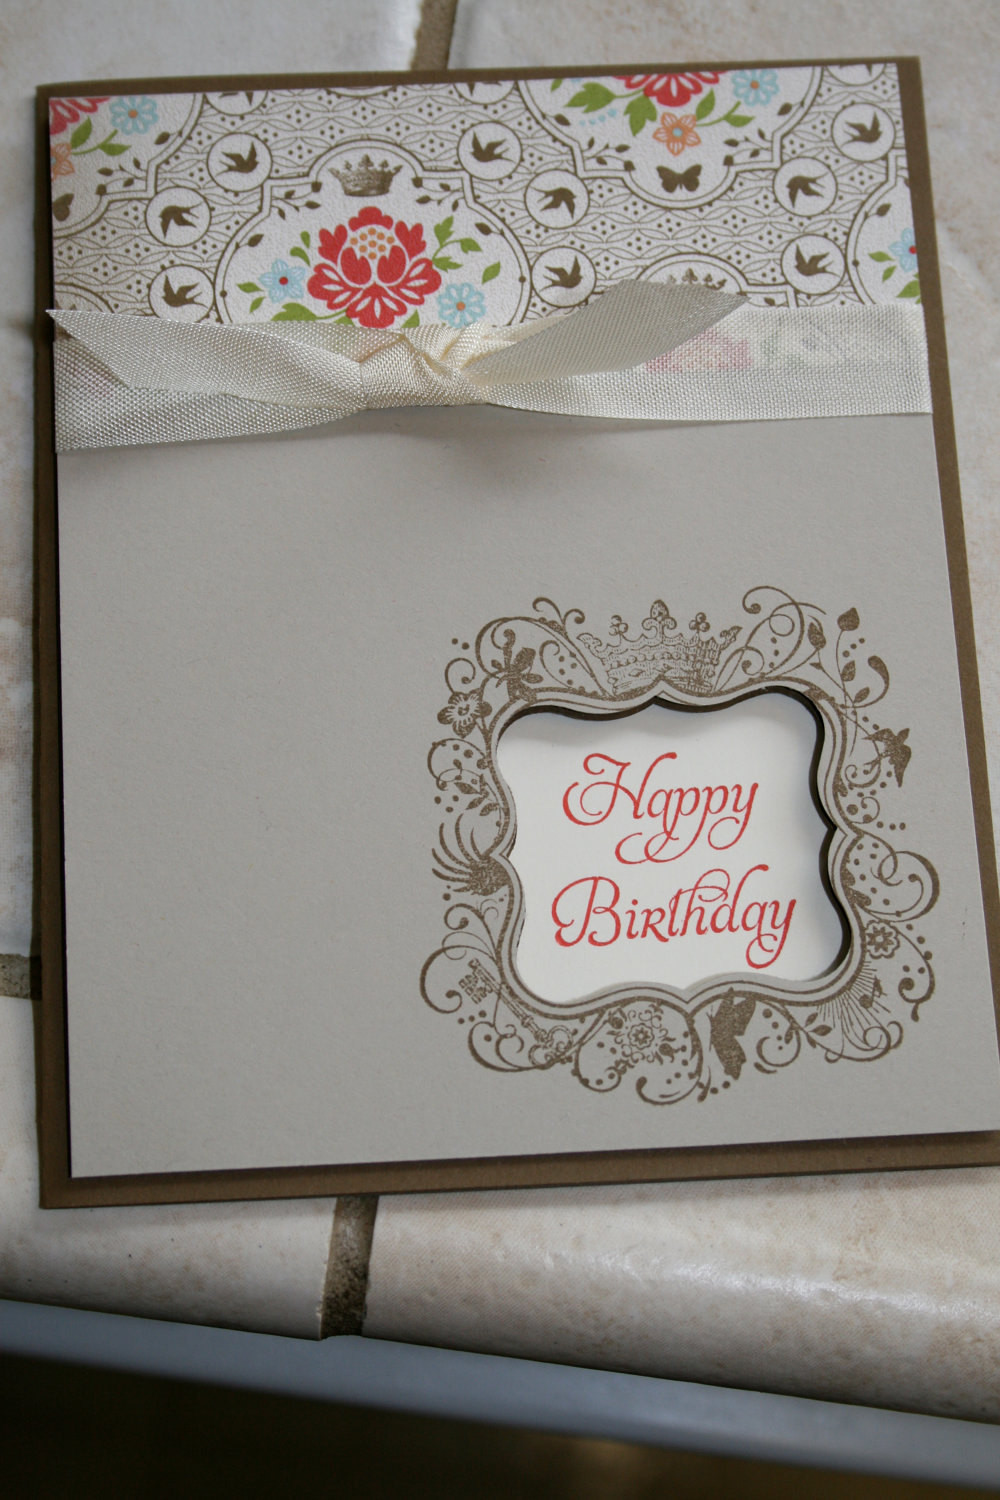 Stampin Up Birthday Cards
 Stampin Up Happy Birthday Greeting Card Stamped Hand Made